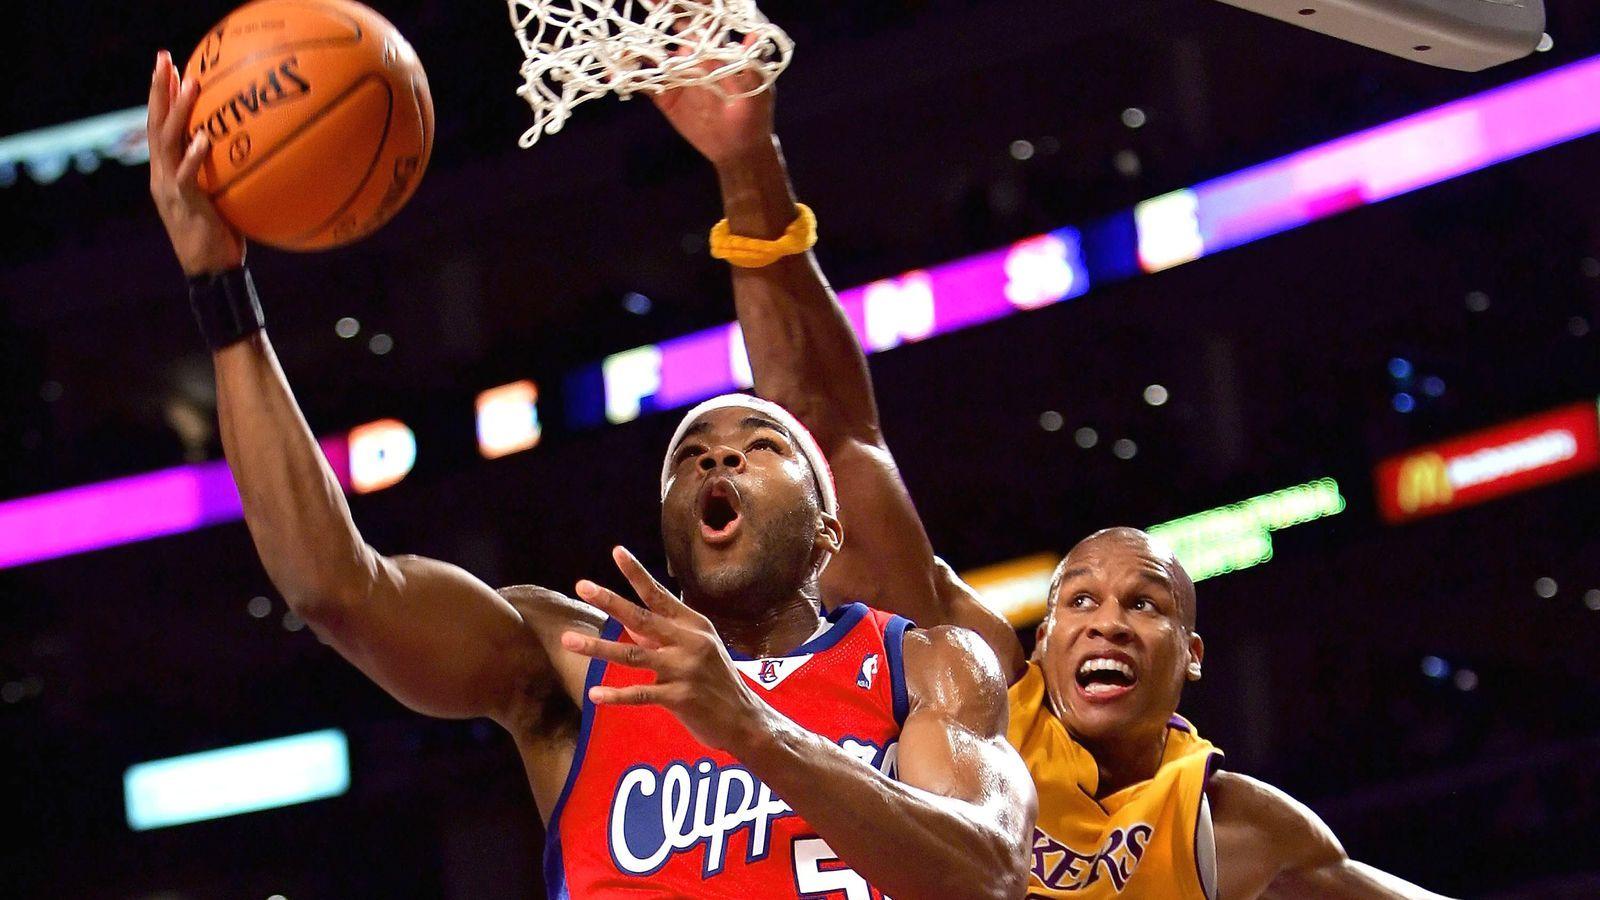 NBA Rumors: Lakers interview Corey Maggette and others for a